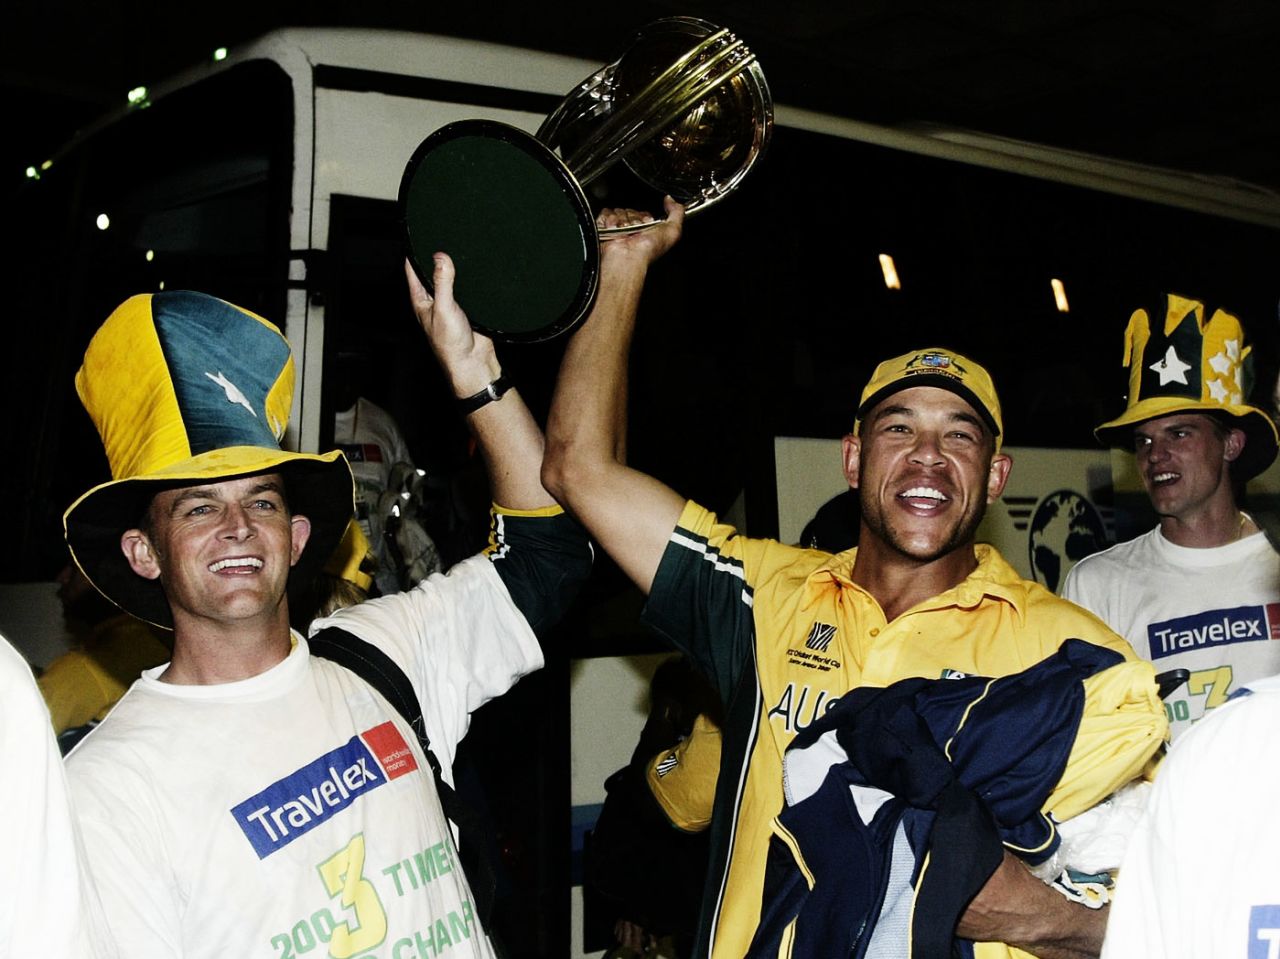 Adam Gilchrist and Andrew Symonds with the World Cup, Johannesburg, March 23, 2003